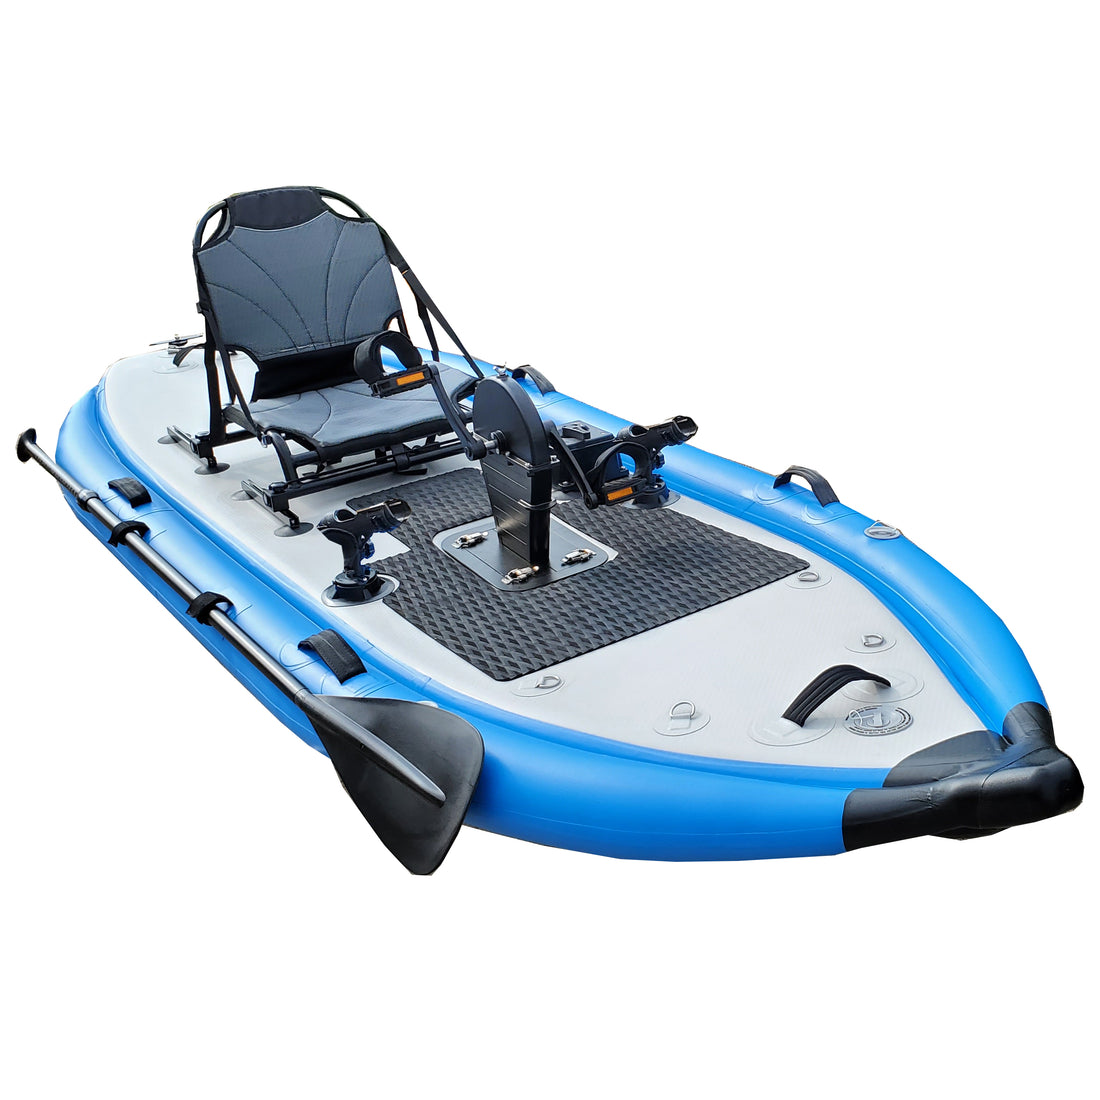 Which kayak is right for me?